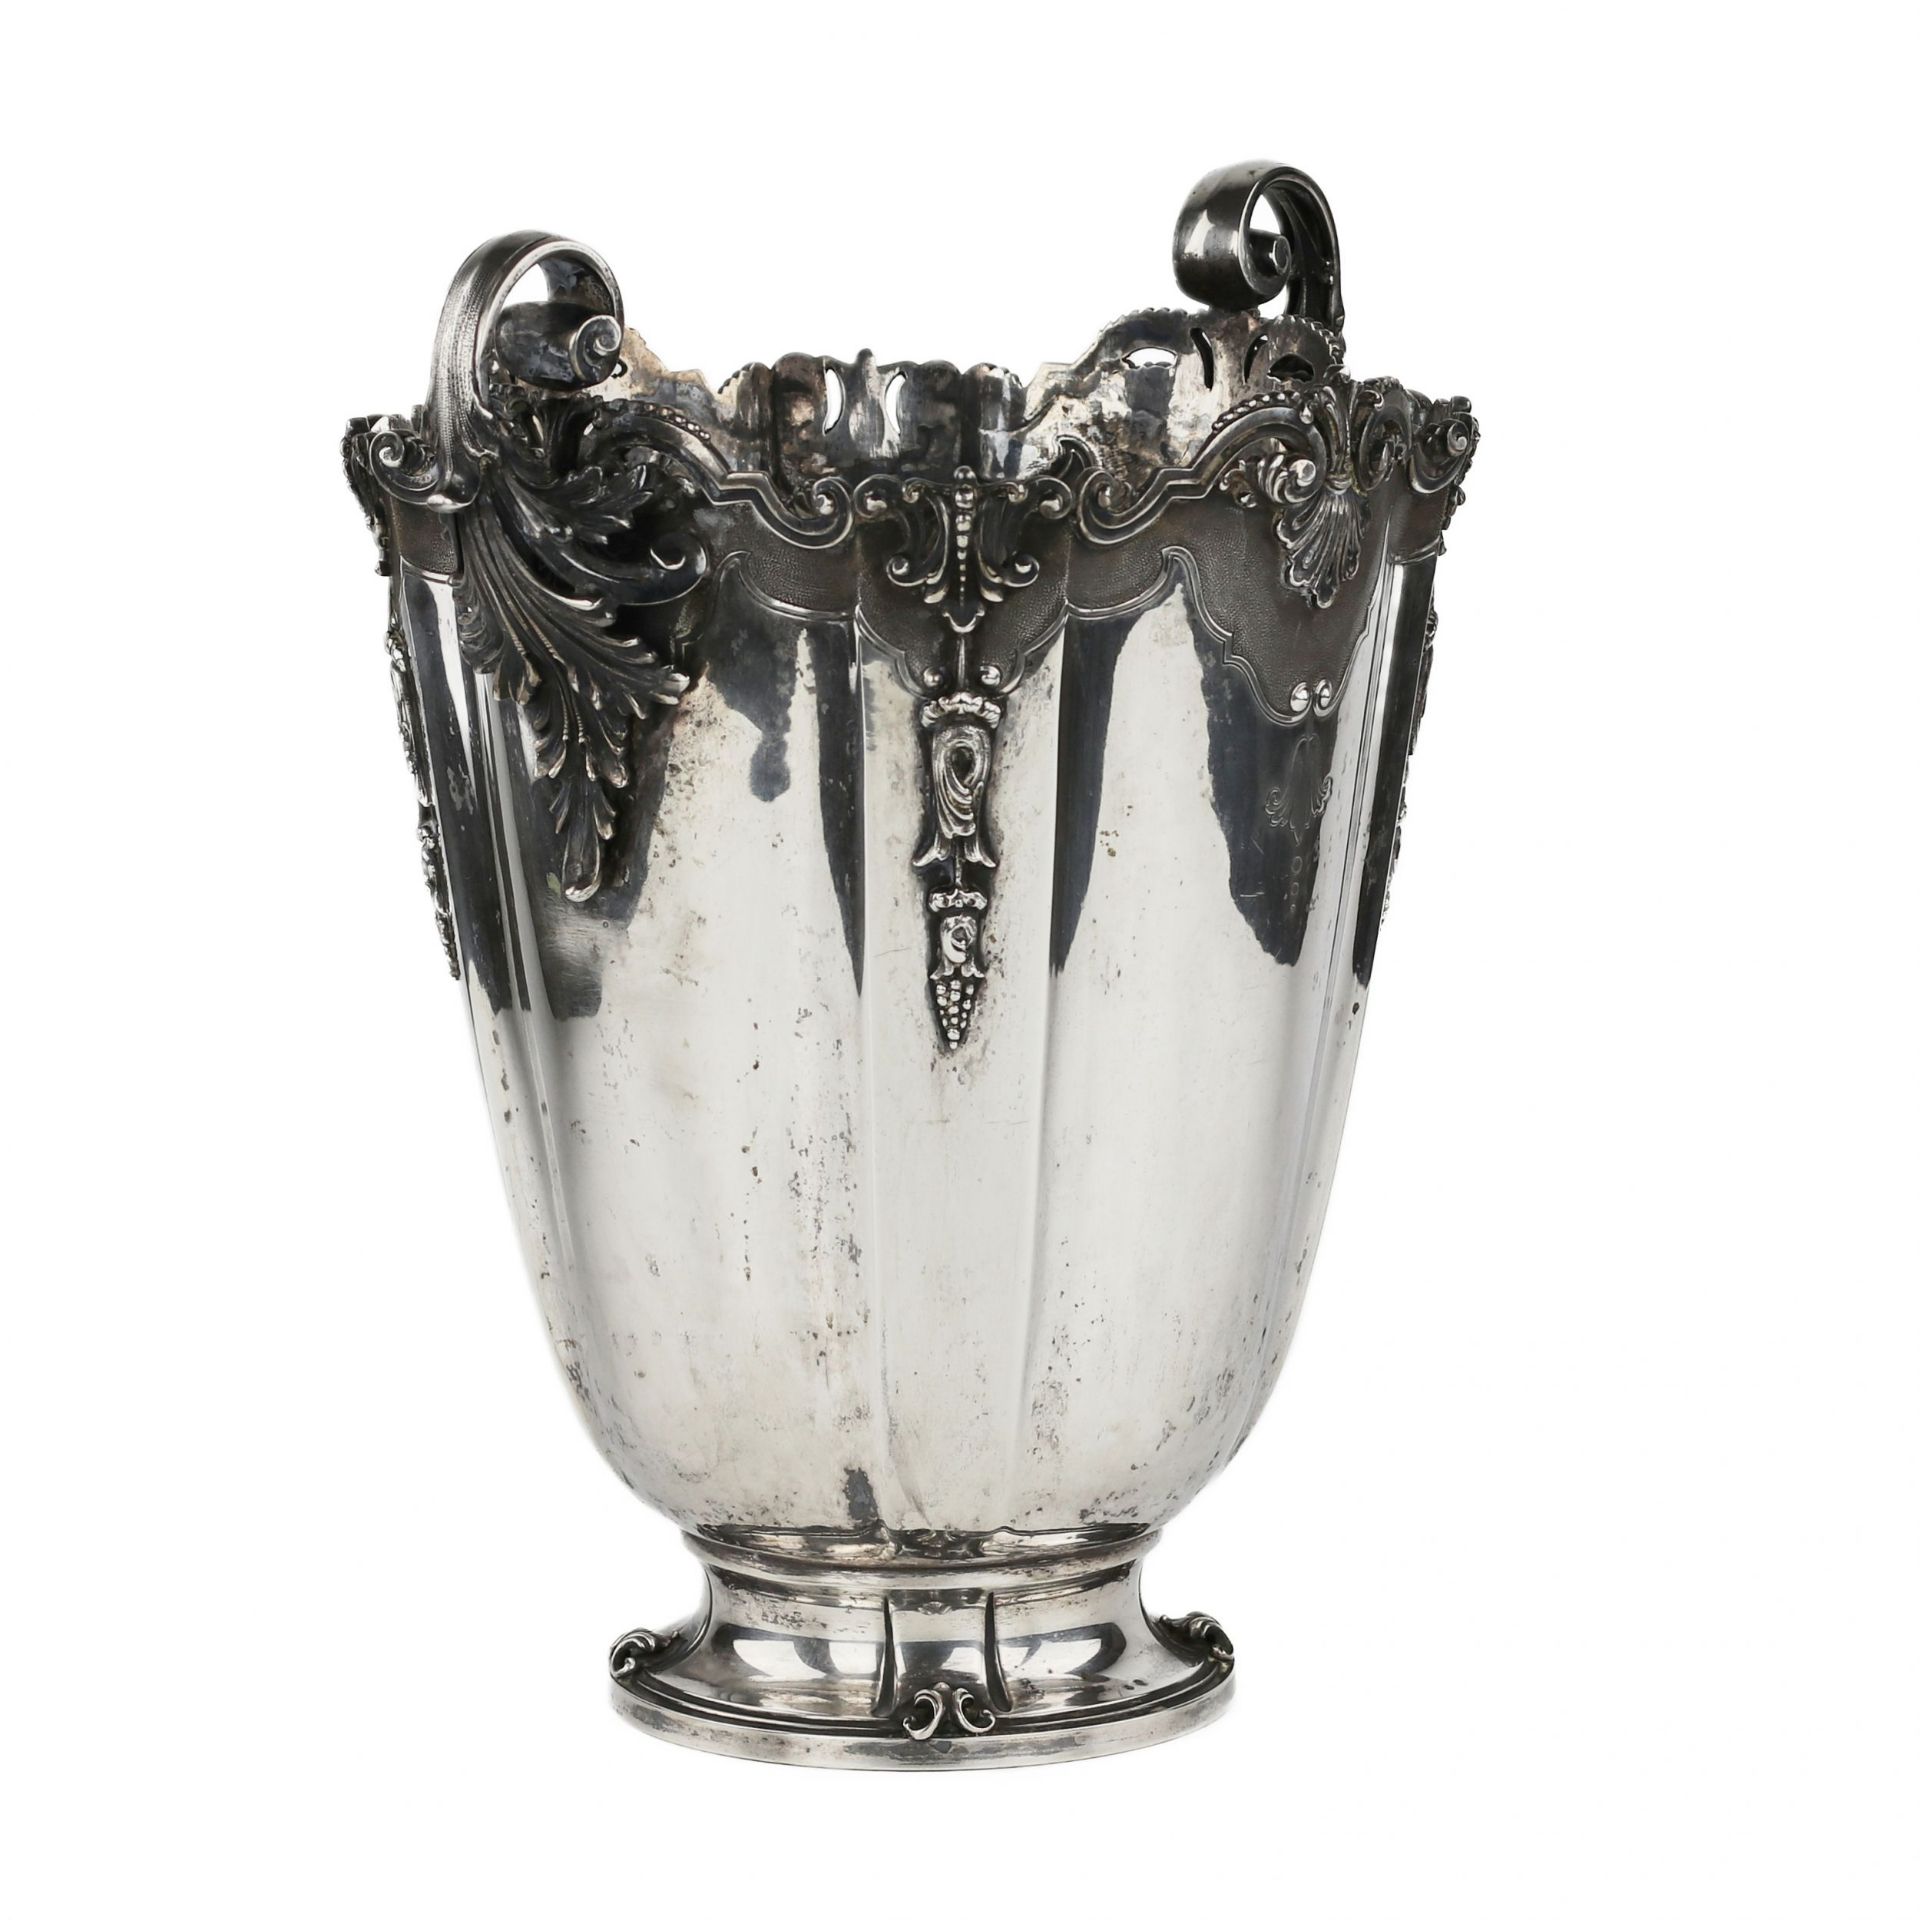 An ornate Italian silver cooler in the shape of a vase. 1934-1944 - Image 2 of 7